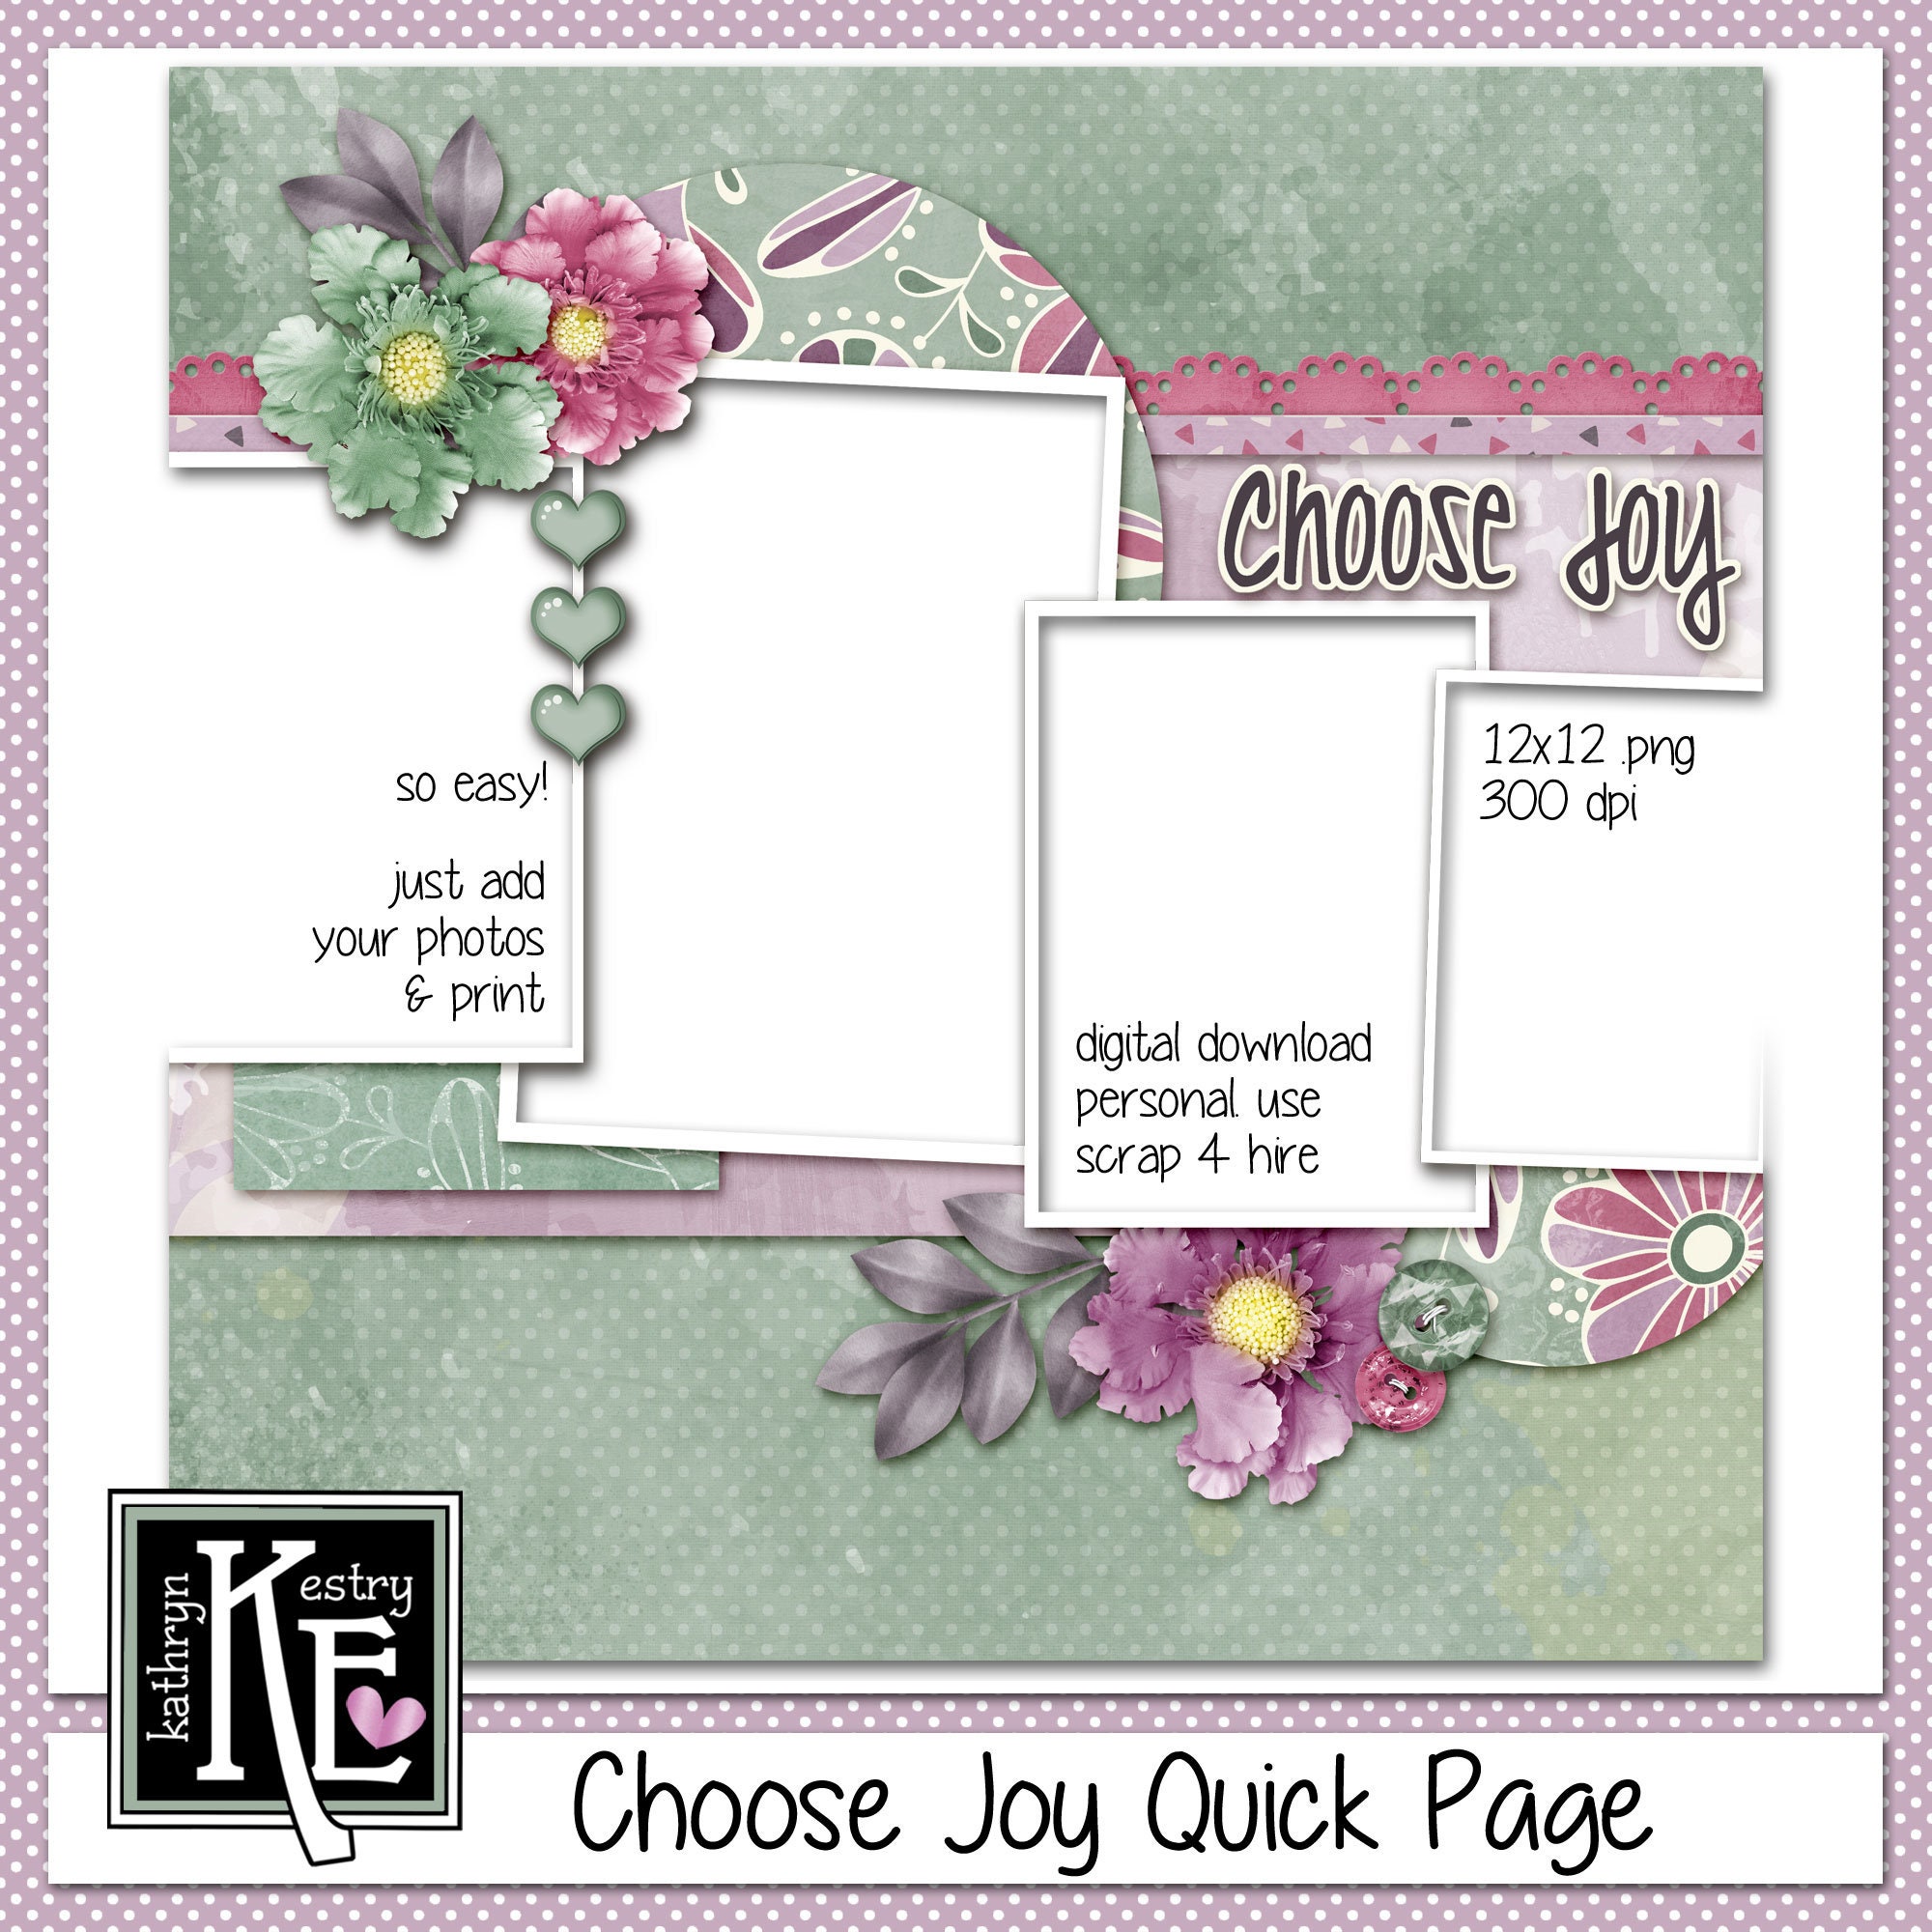 Butterflies and Bluejeans 12x12 Pre-made Quick Pages Digital Scrapbook Kit  Digital Scrapbooking 